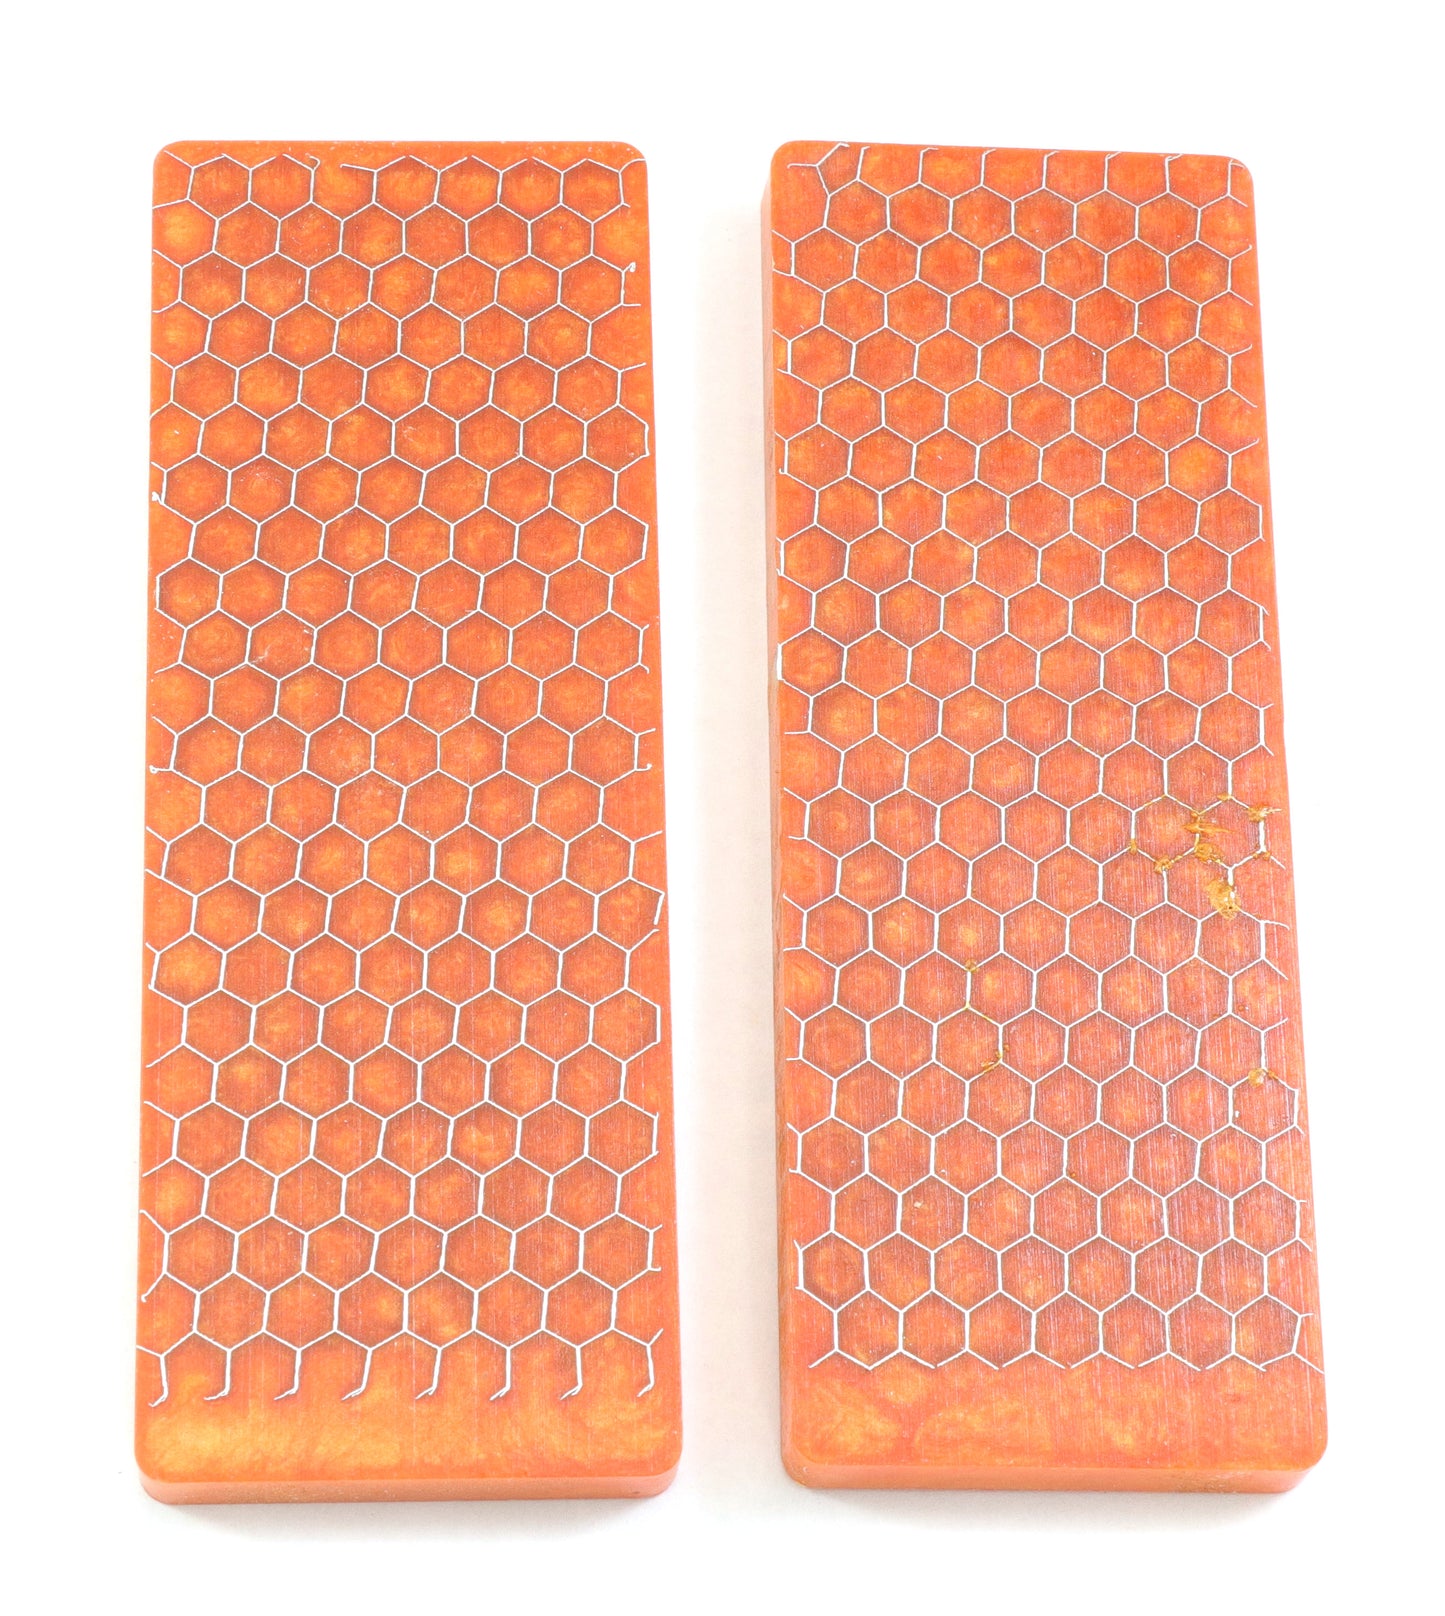 Honeycomb Knife Scale Blanks